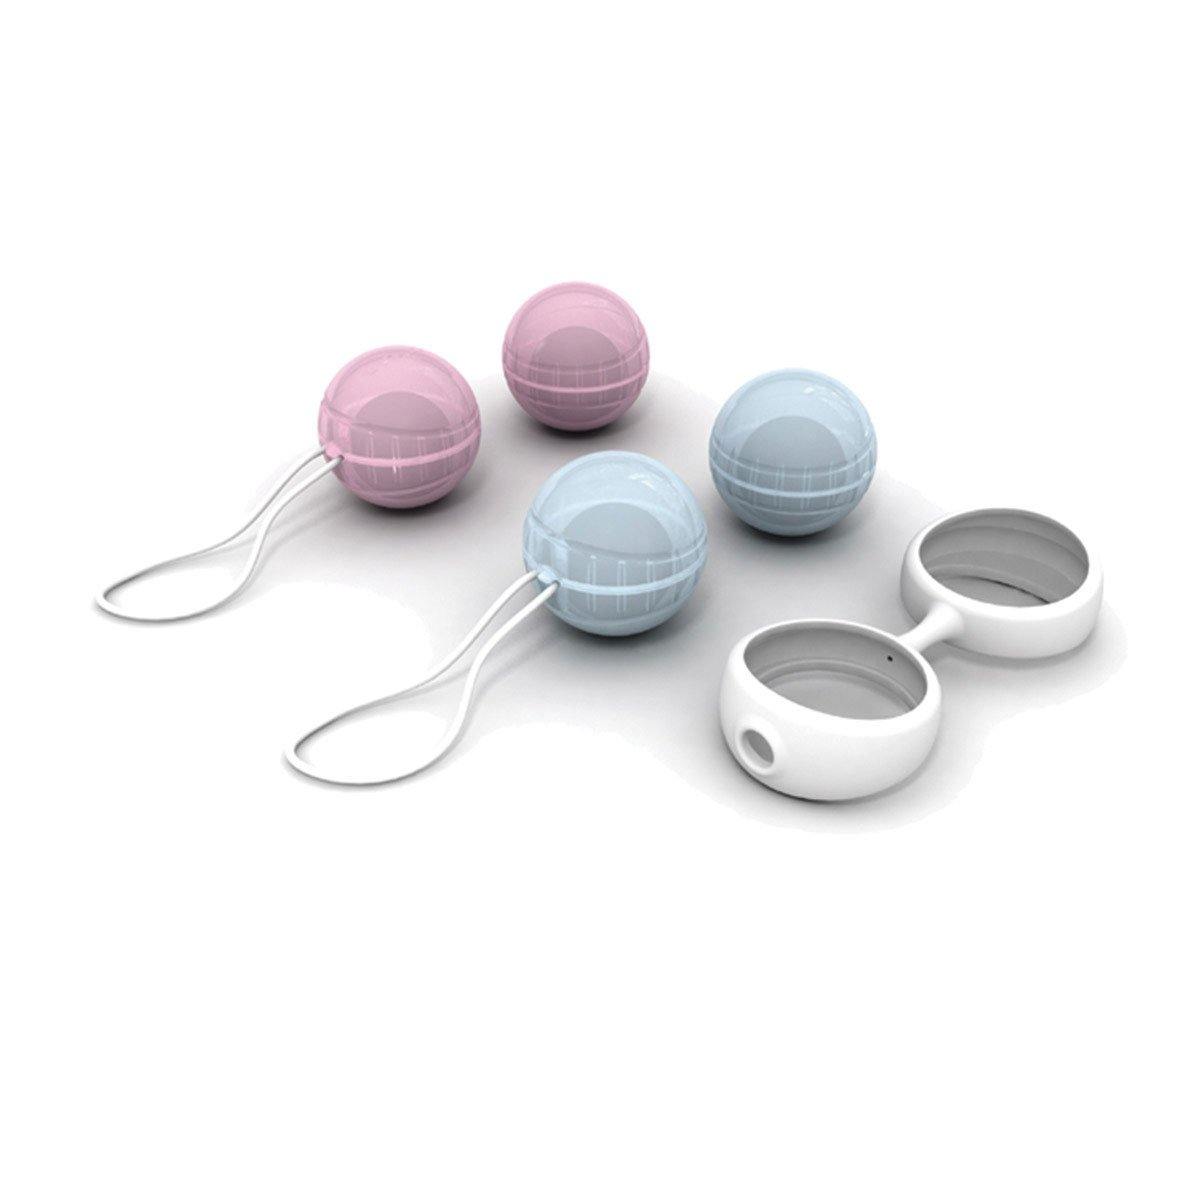 Lelo Luna Beads White - Buy At Luxury Toy X - Free 3-Day Shipping